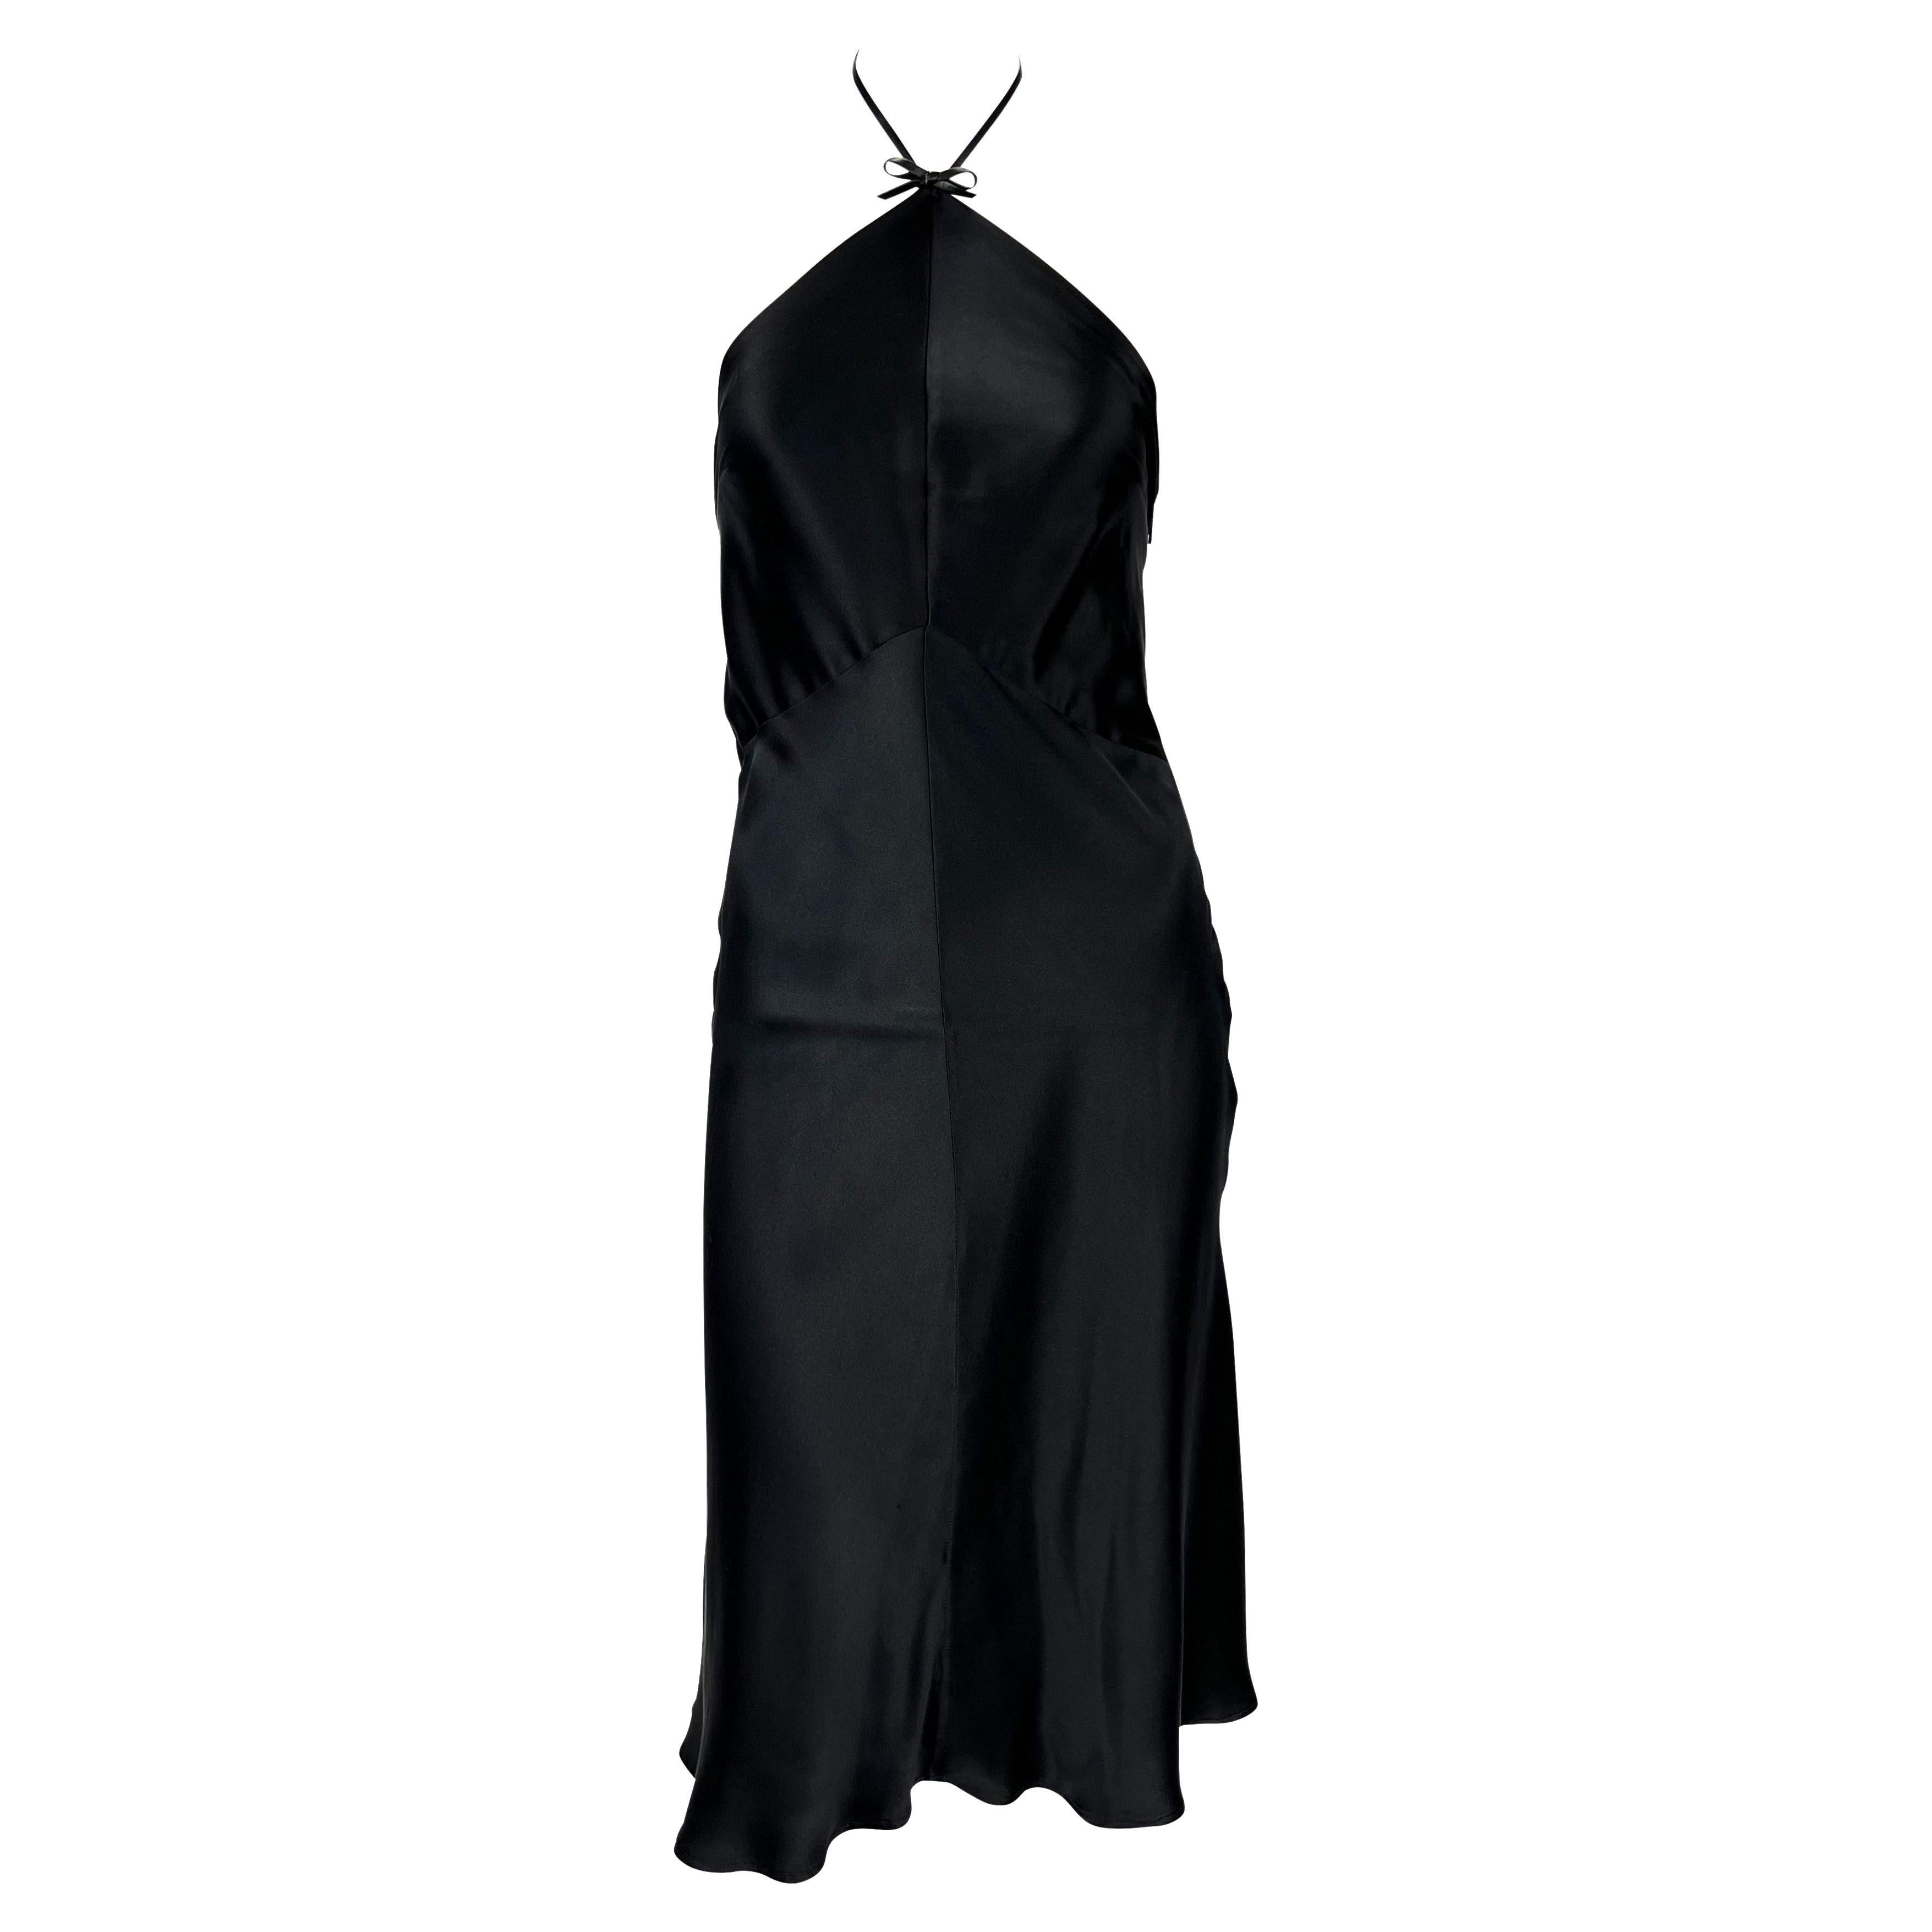 S/S 2000 Gucci by Tom Ford Black Silk Satin Leather Bow Halter Flare Dress